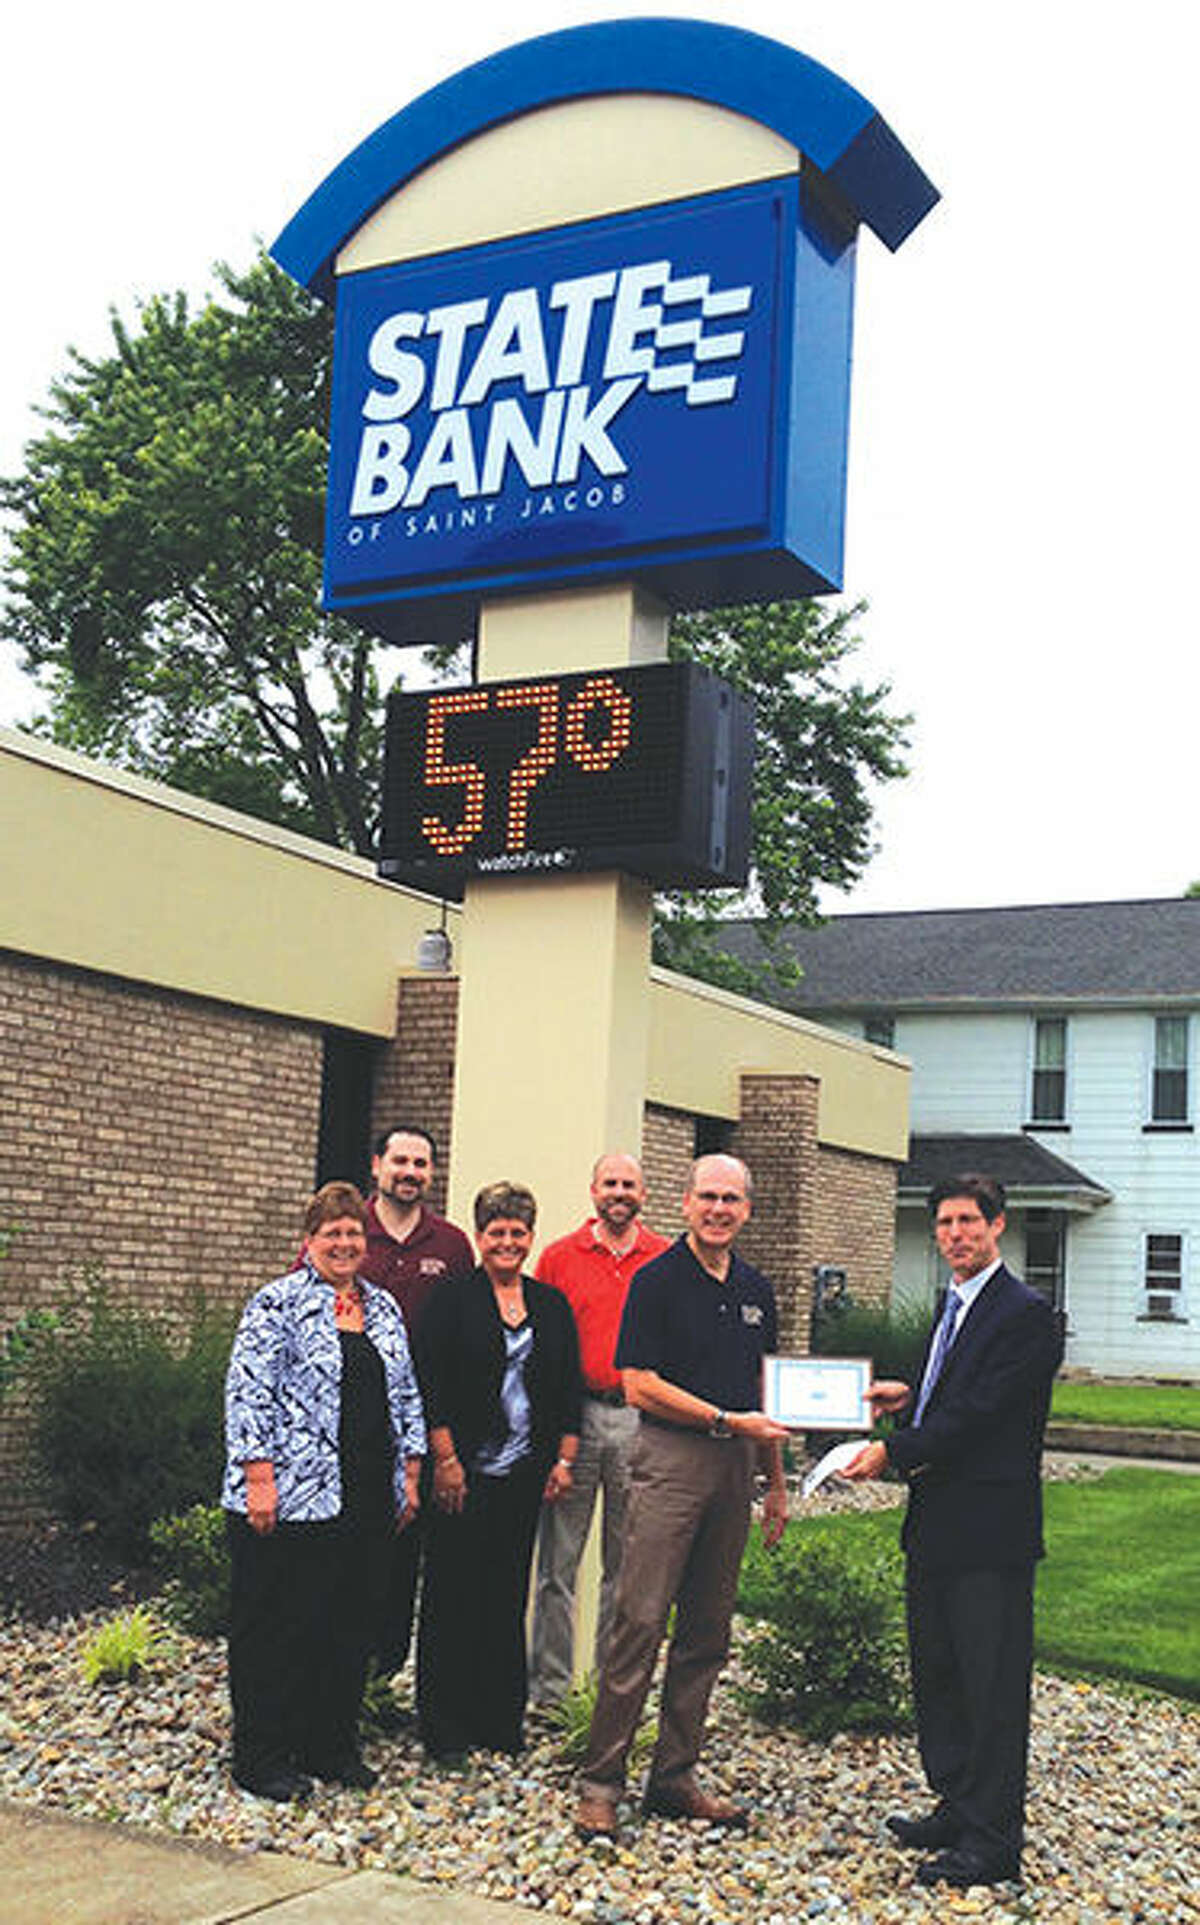 Madison County Treasurer Kurt Prenzler (far right) presents employees of State Bank of St. Jacob with the “Top Performer” certificate in the collection of real estate taxes. Bank employees from left to right: Pam Schuette, Dave Prange, Debbie Seger, Scott Prange and Steve Prange.